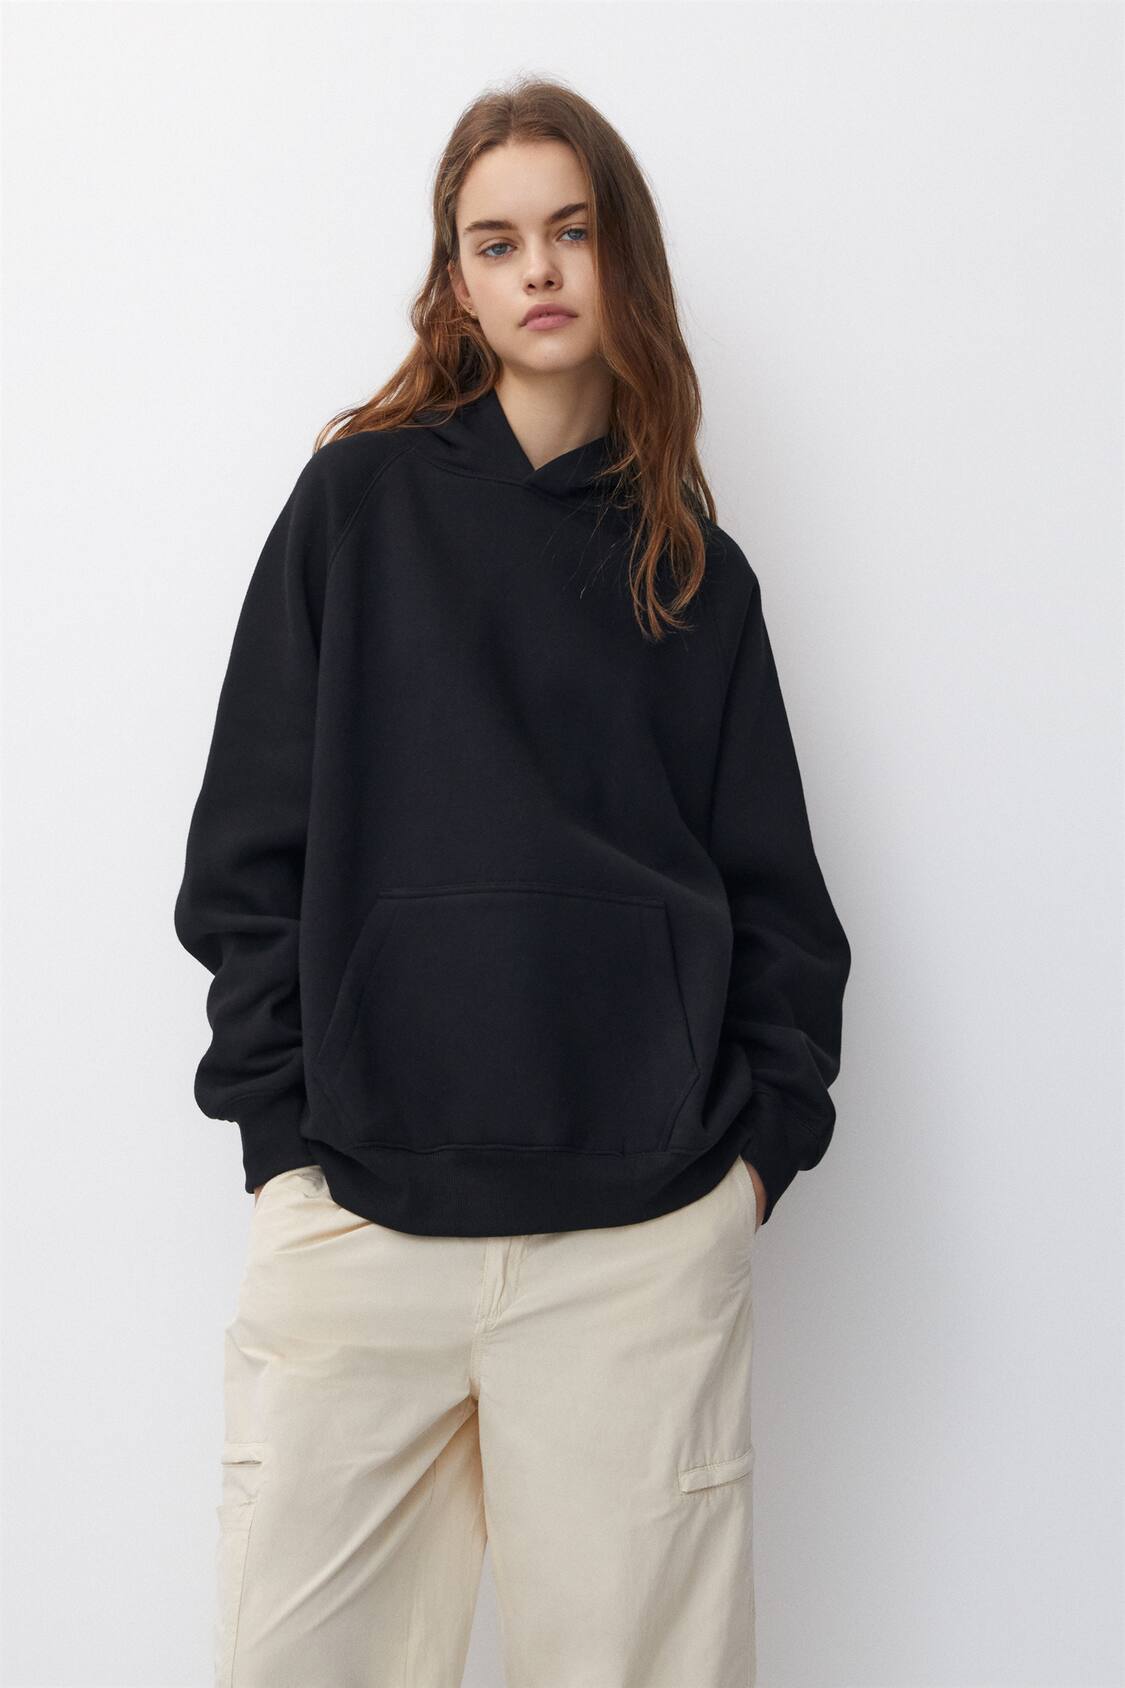 Oversize - Sudaderas - Ropa - Mujer - PULL&BEAR Colombia